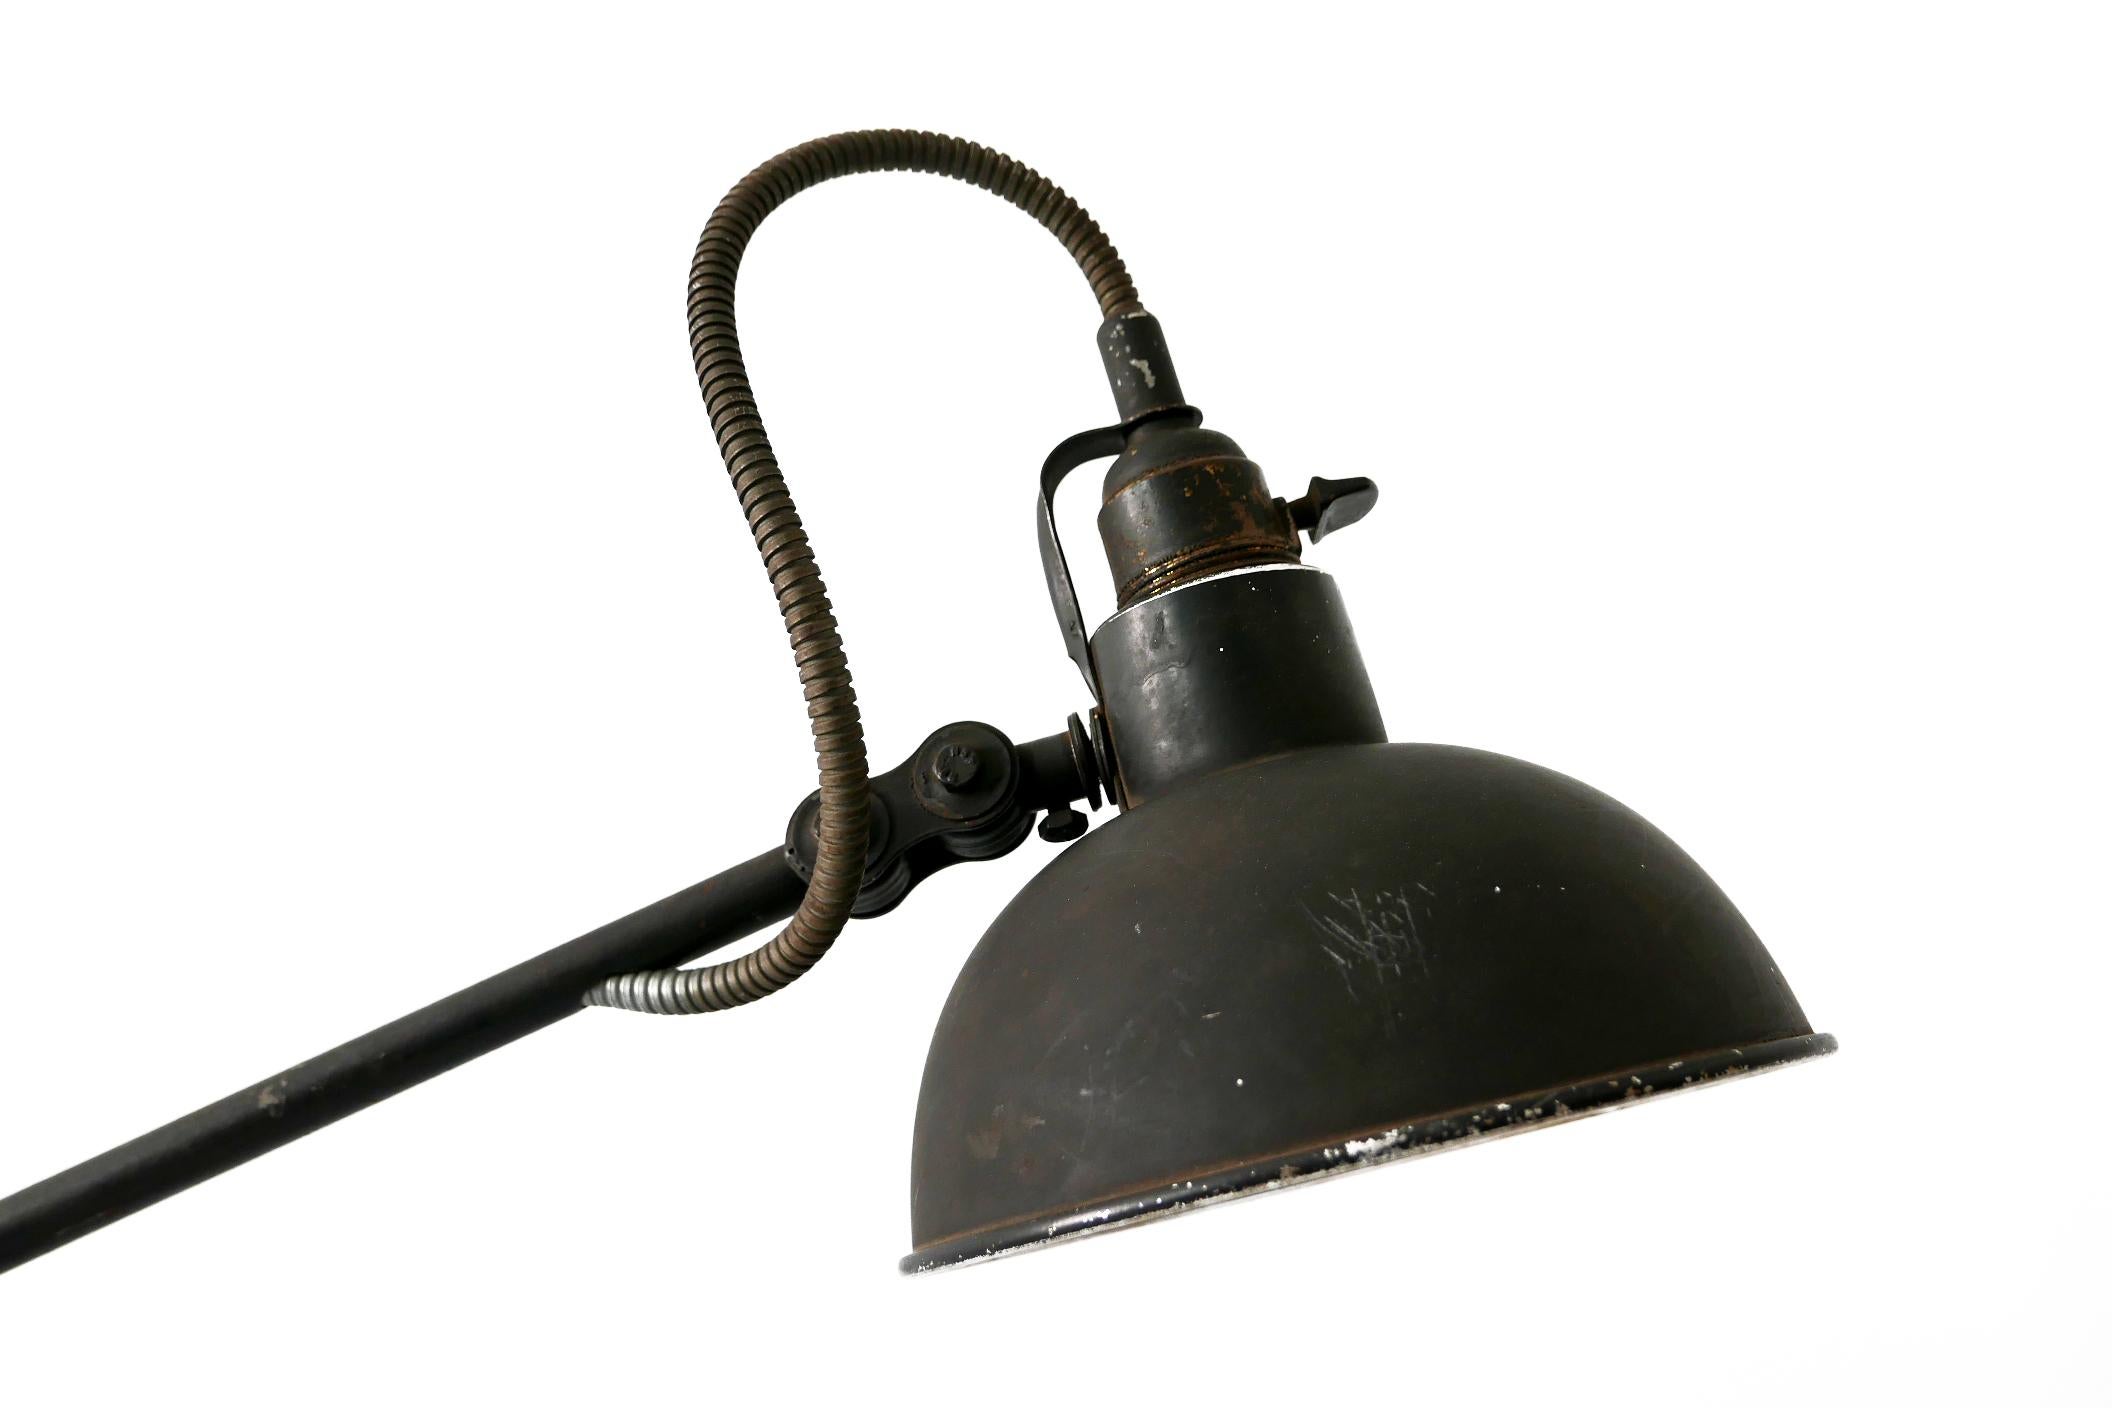 Exceptional Articulated Bauhaus Workshop Wall Lamp or Task Light 1920s Germany For Sale 2